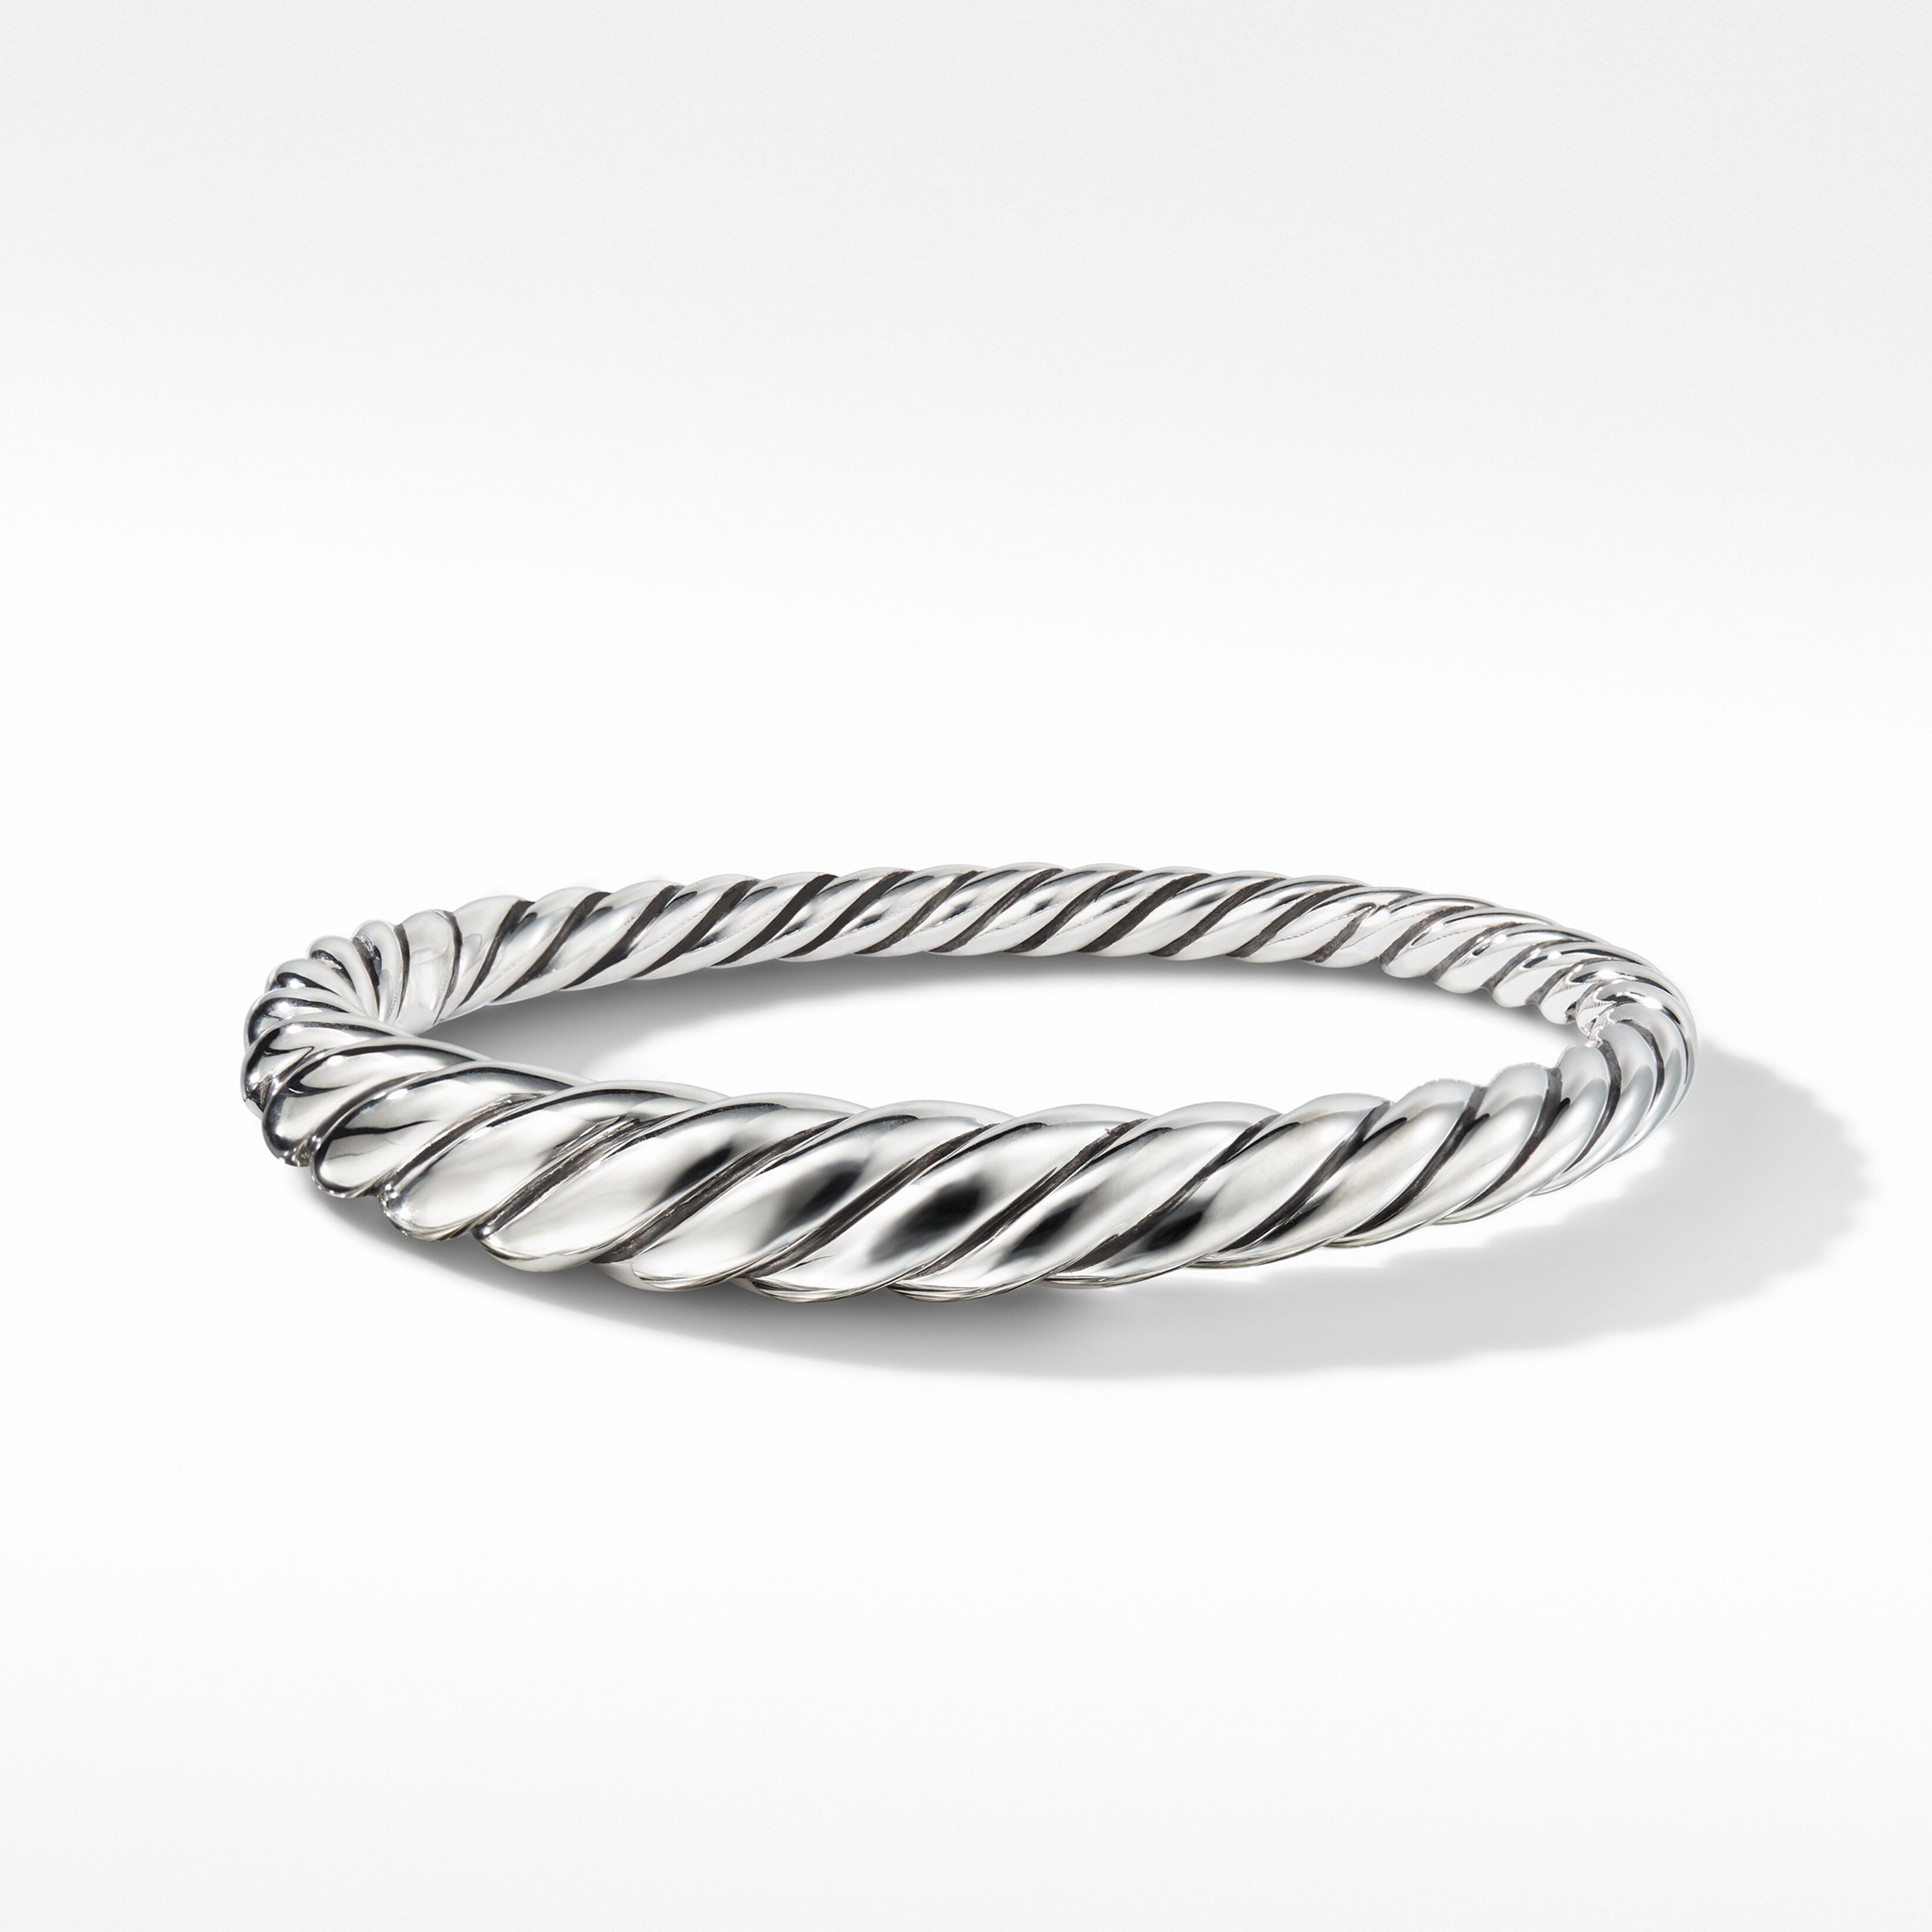 Pure Form® Cable Bracelet in Sterling Silver | David Yurman